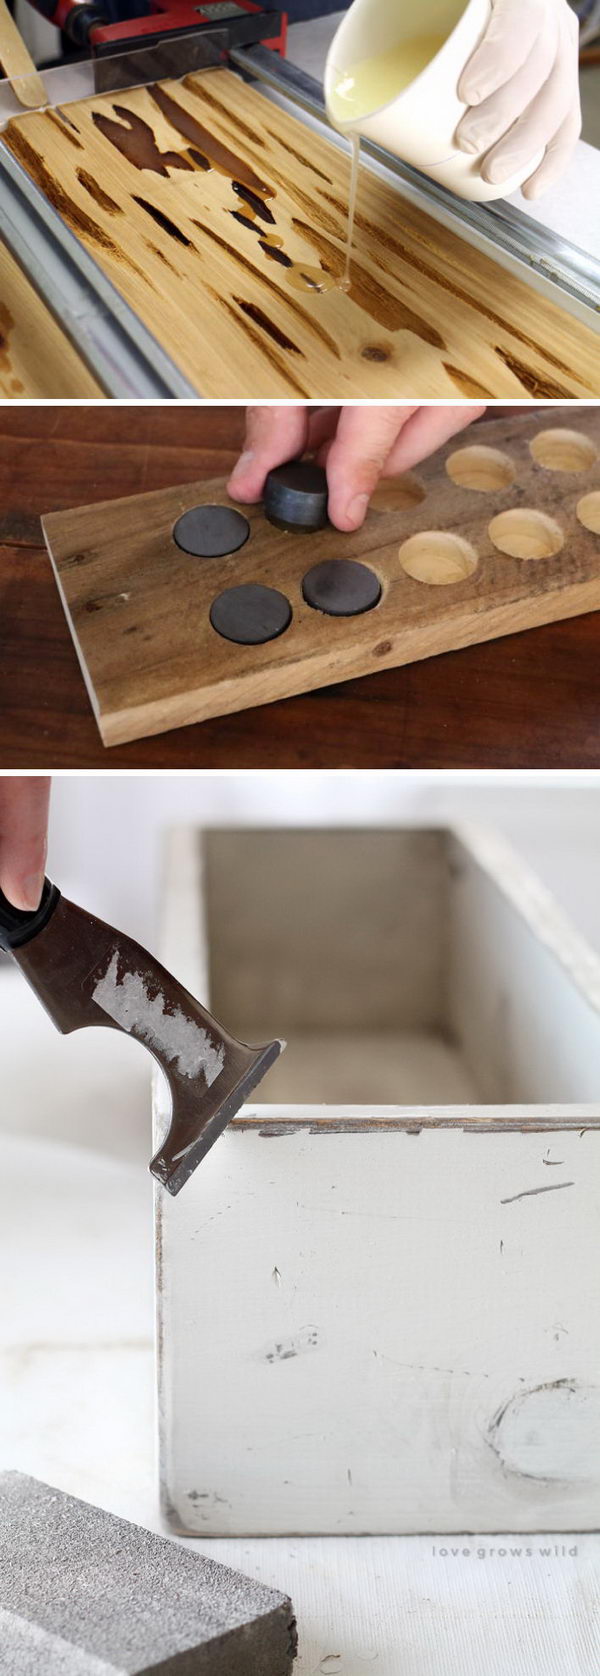 Creative DIY Wood Project Ideas & Tutorials for Your Home! 